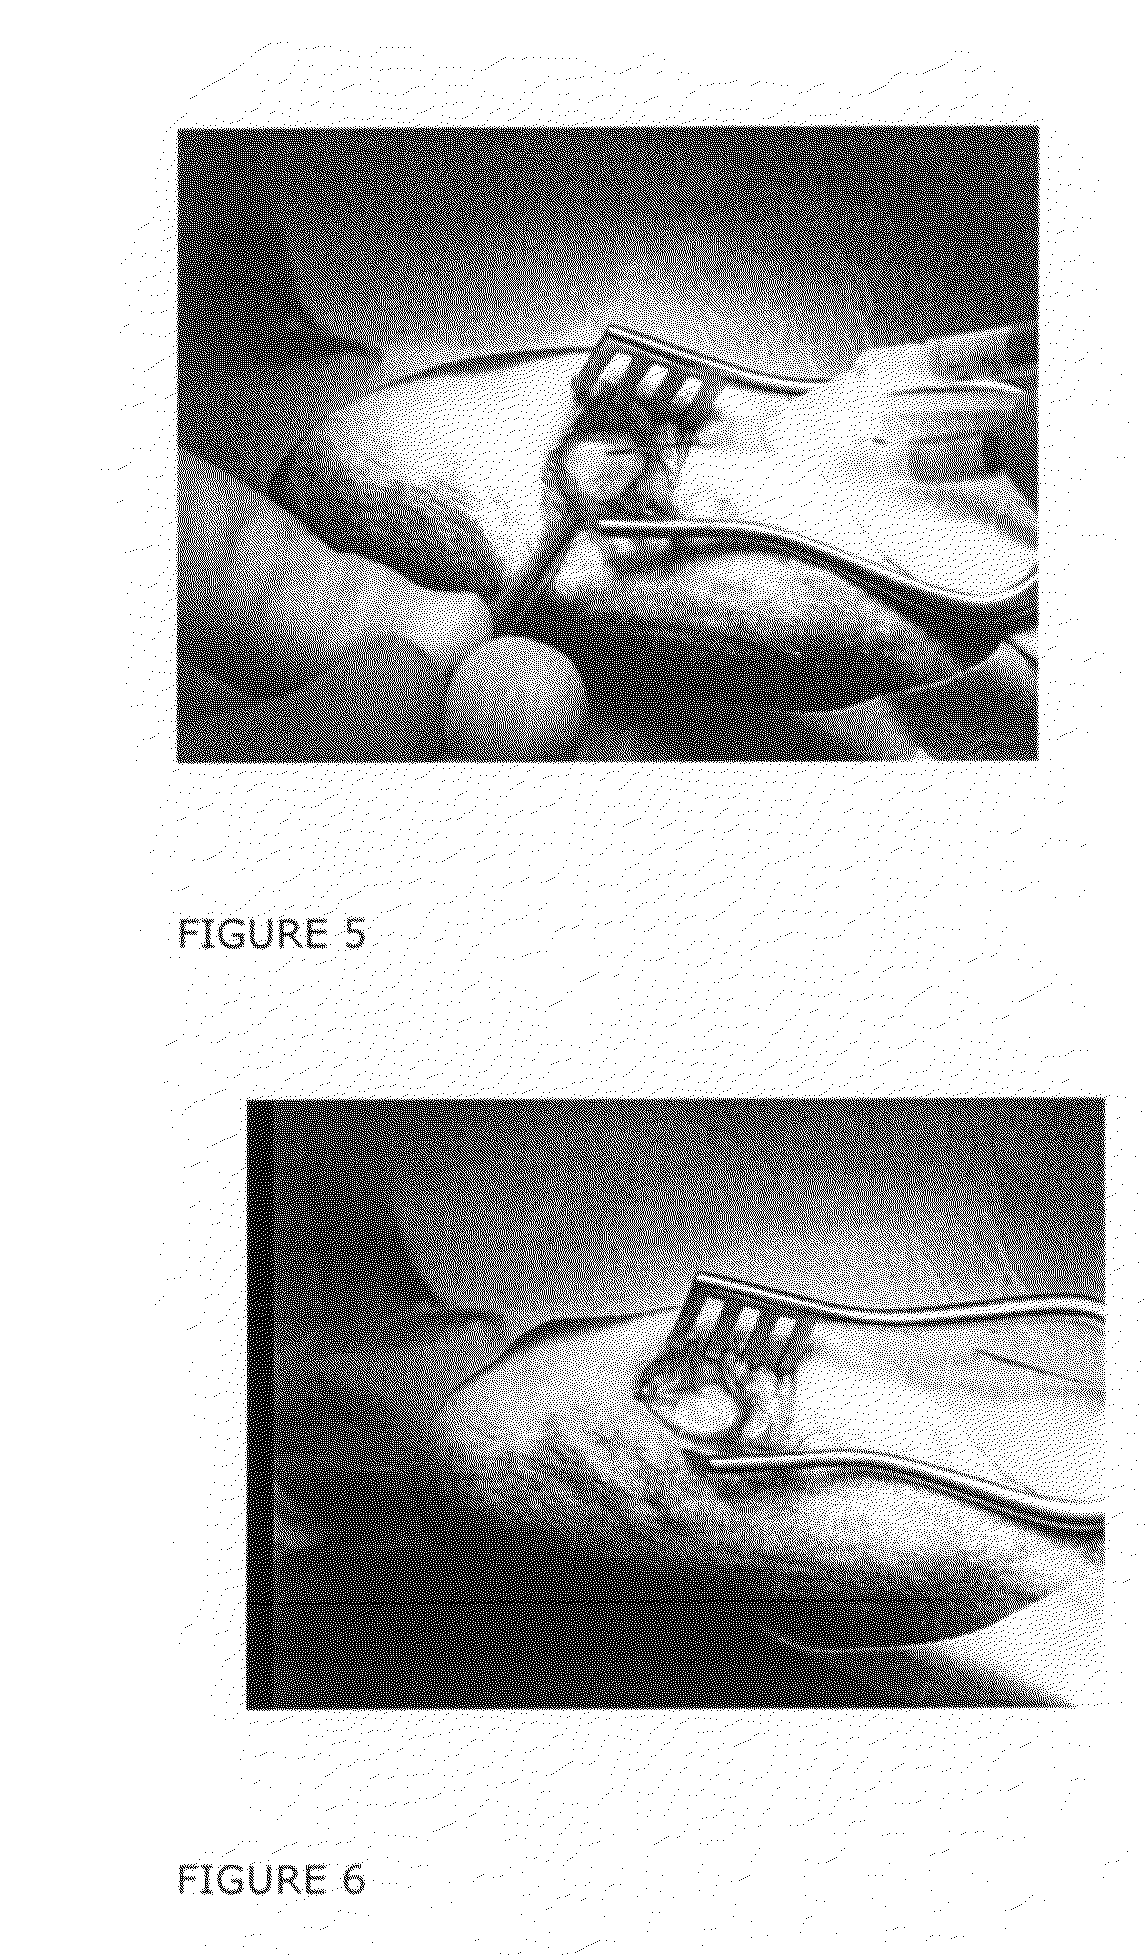 Method for Cell Implantation